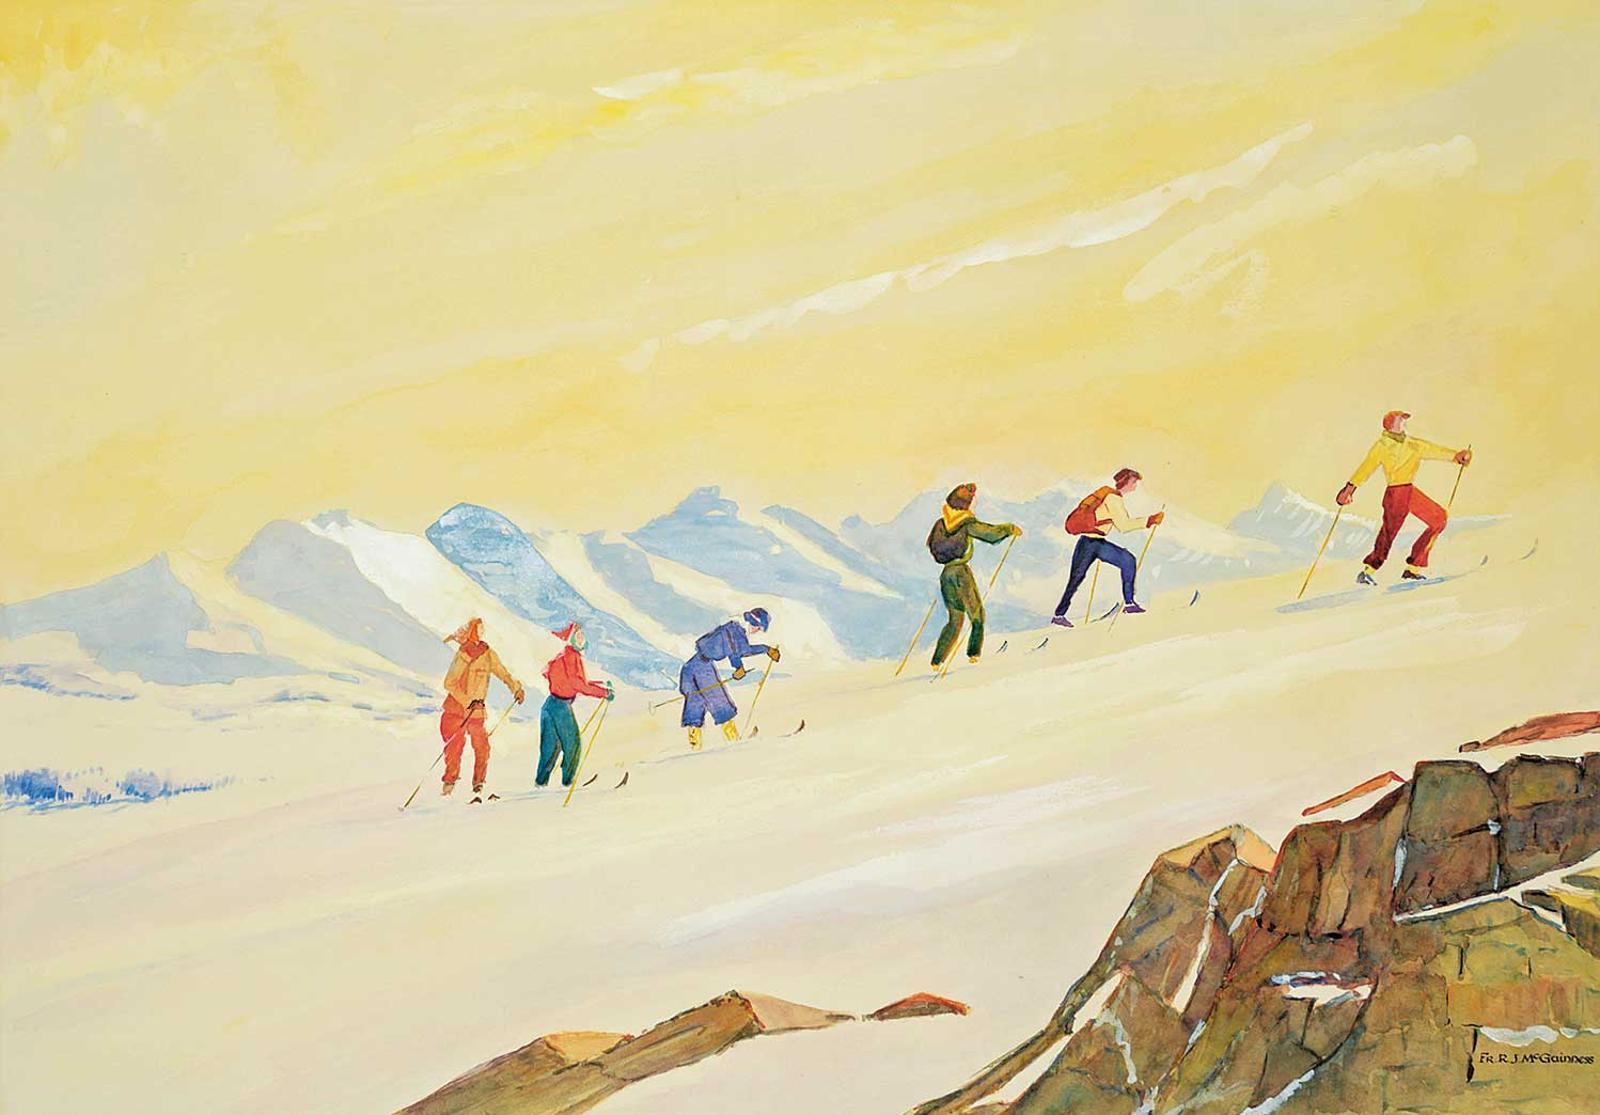 Father Robert James McGuinness - Untitled - Skiing Party on Top of the Glacier